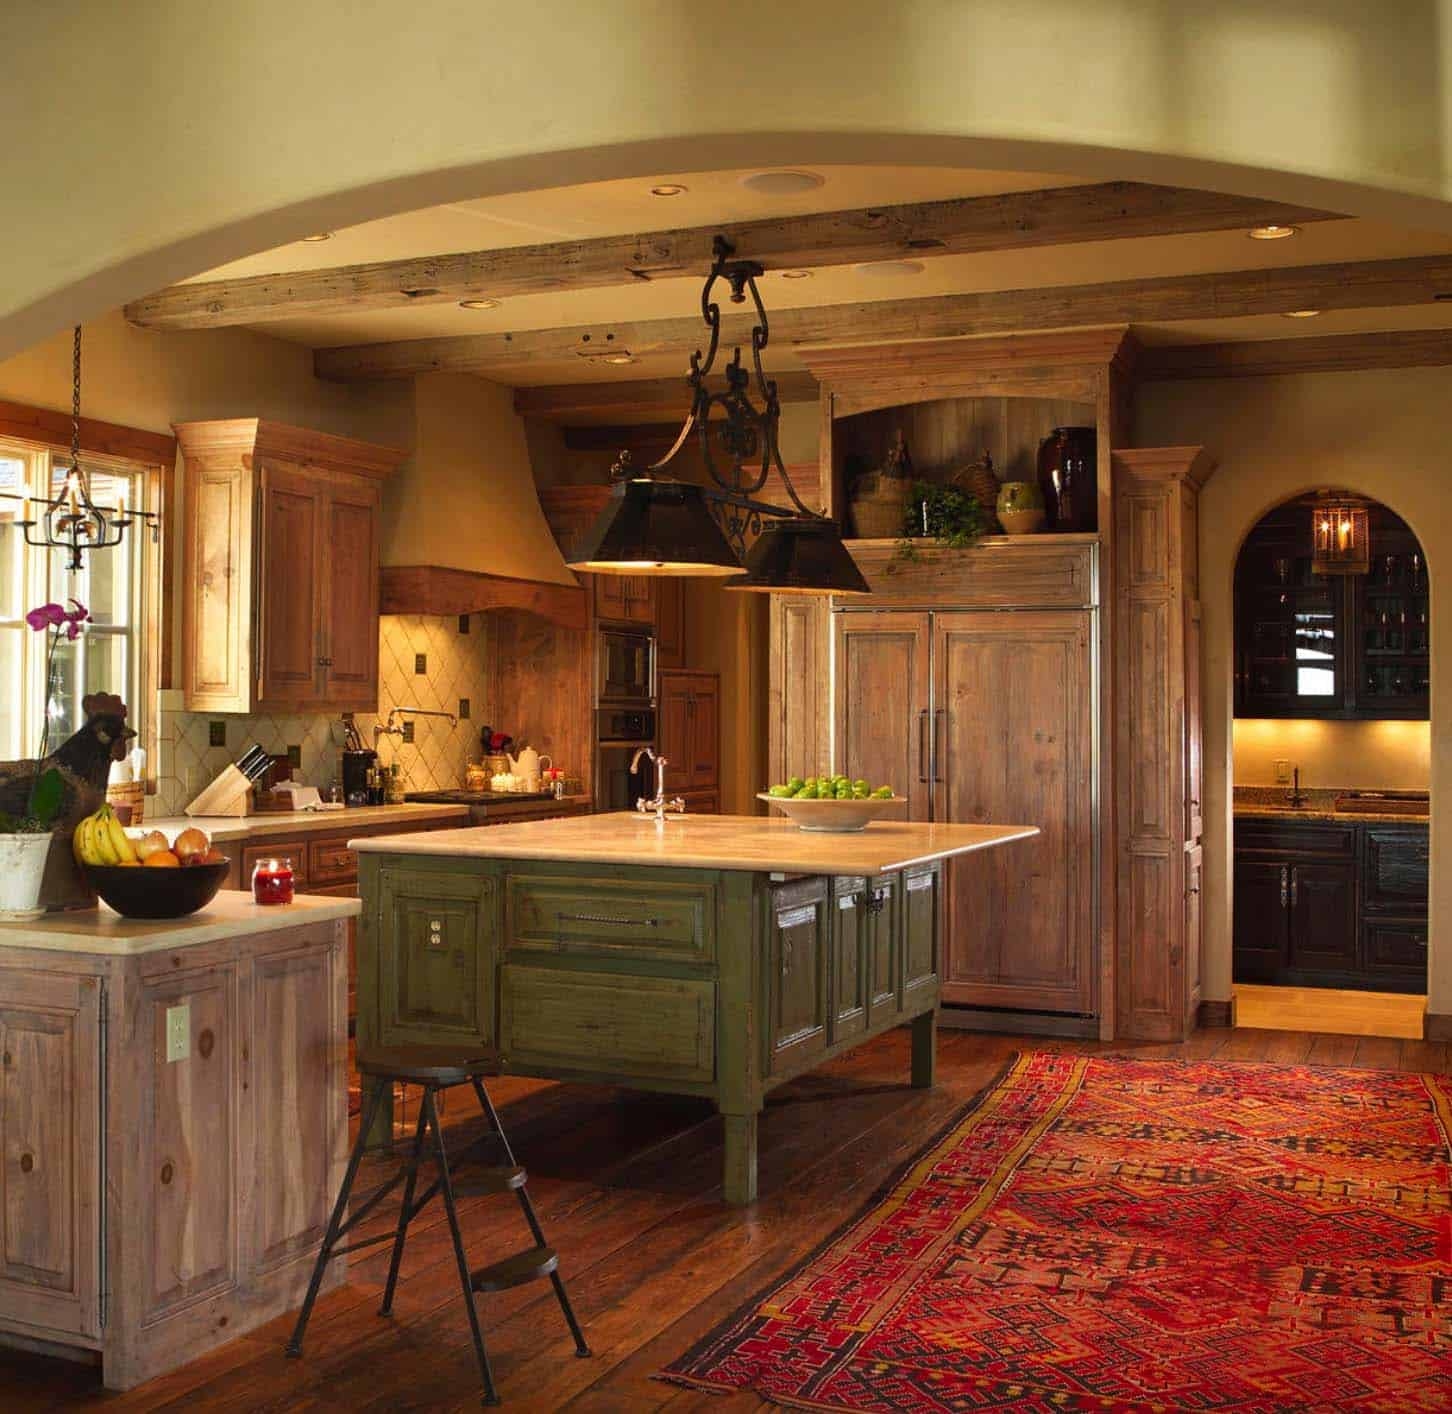 10 Country Kitchen Ideas to Bring Rustic Charm to Your Home